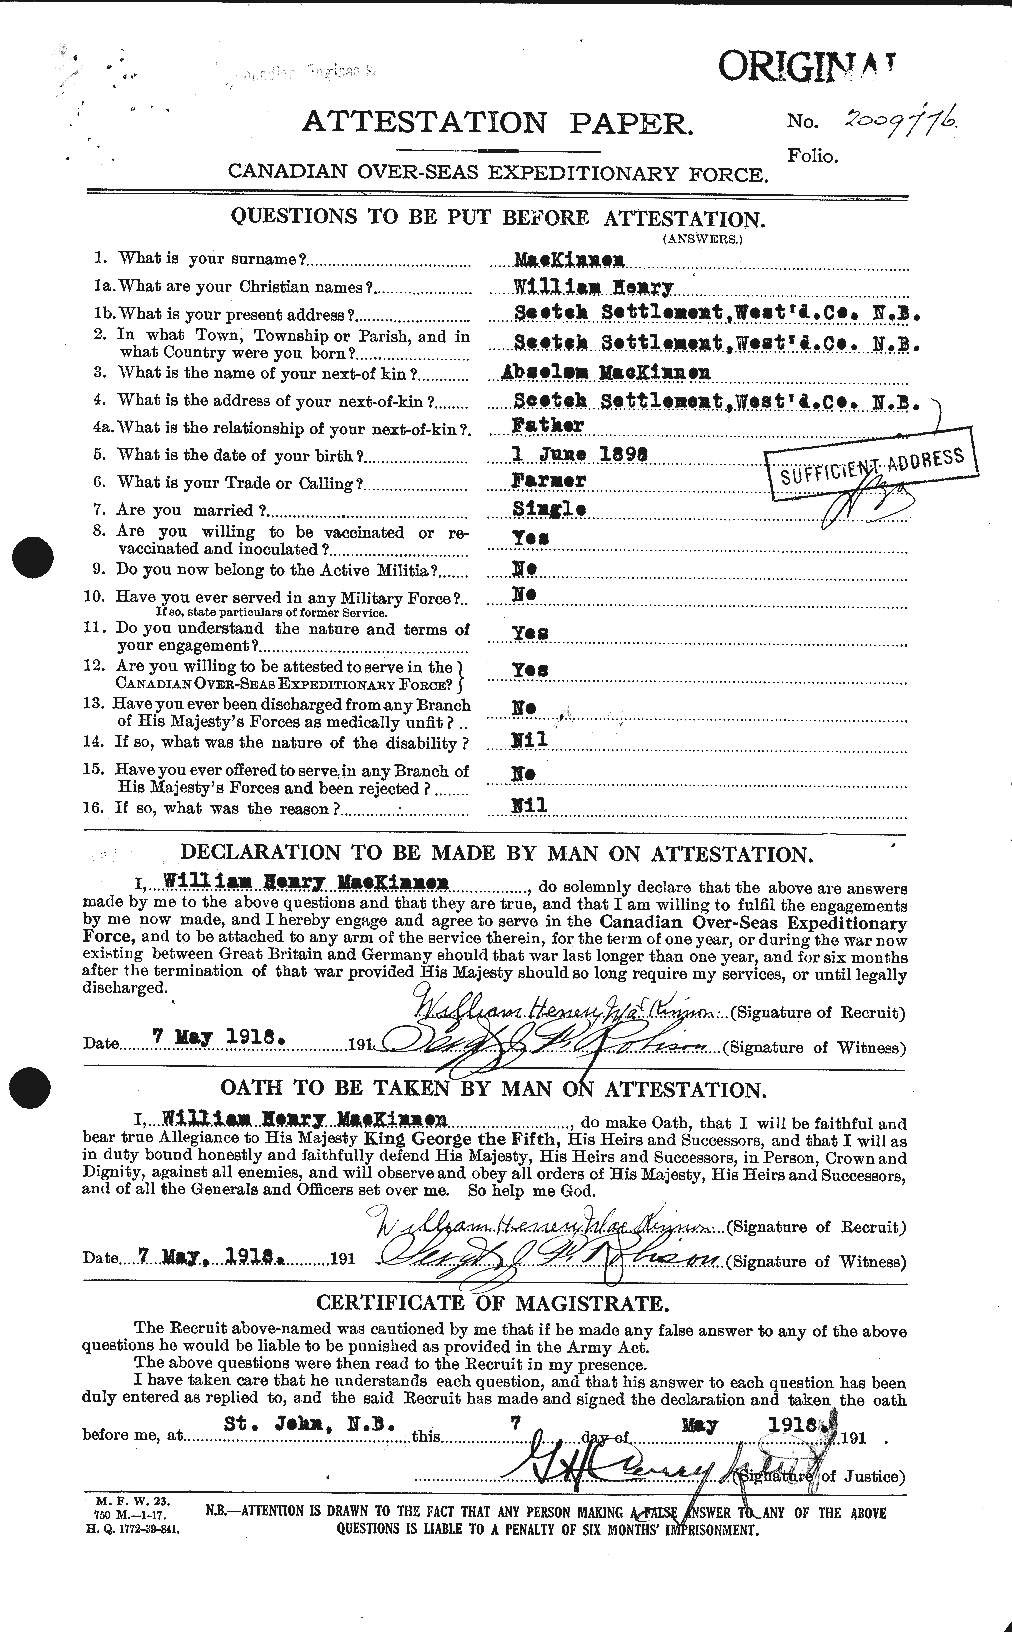 Personnel Records of the First World War - CEF 534328a